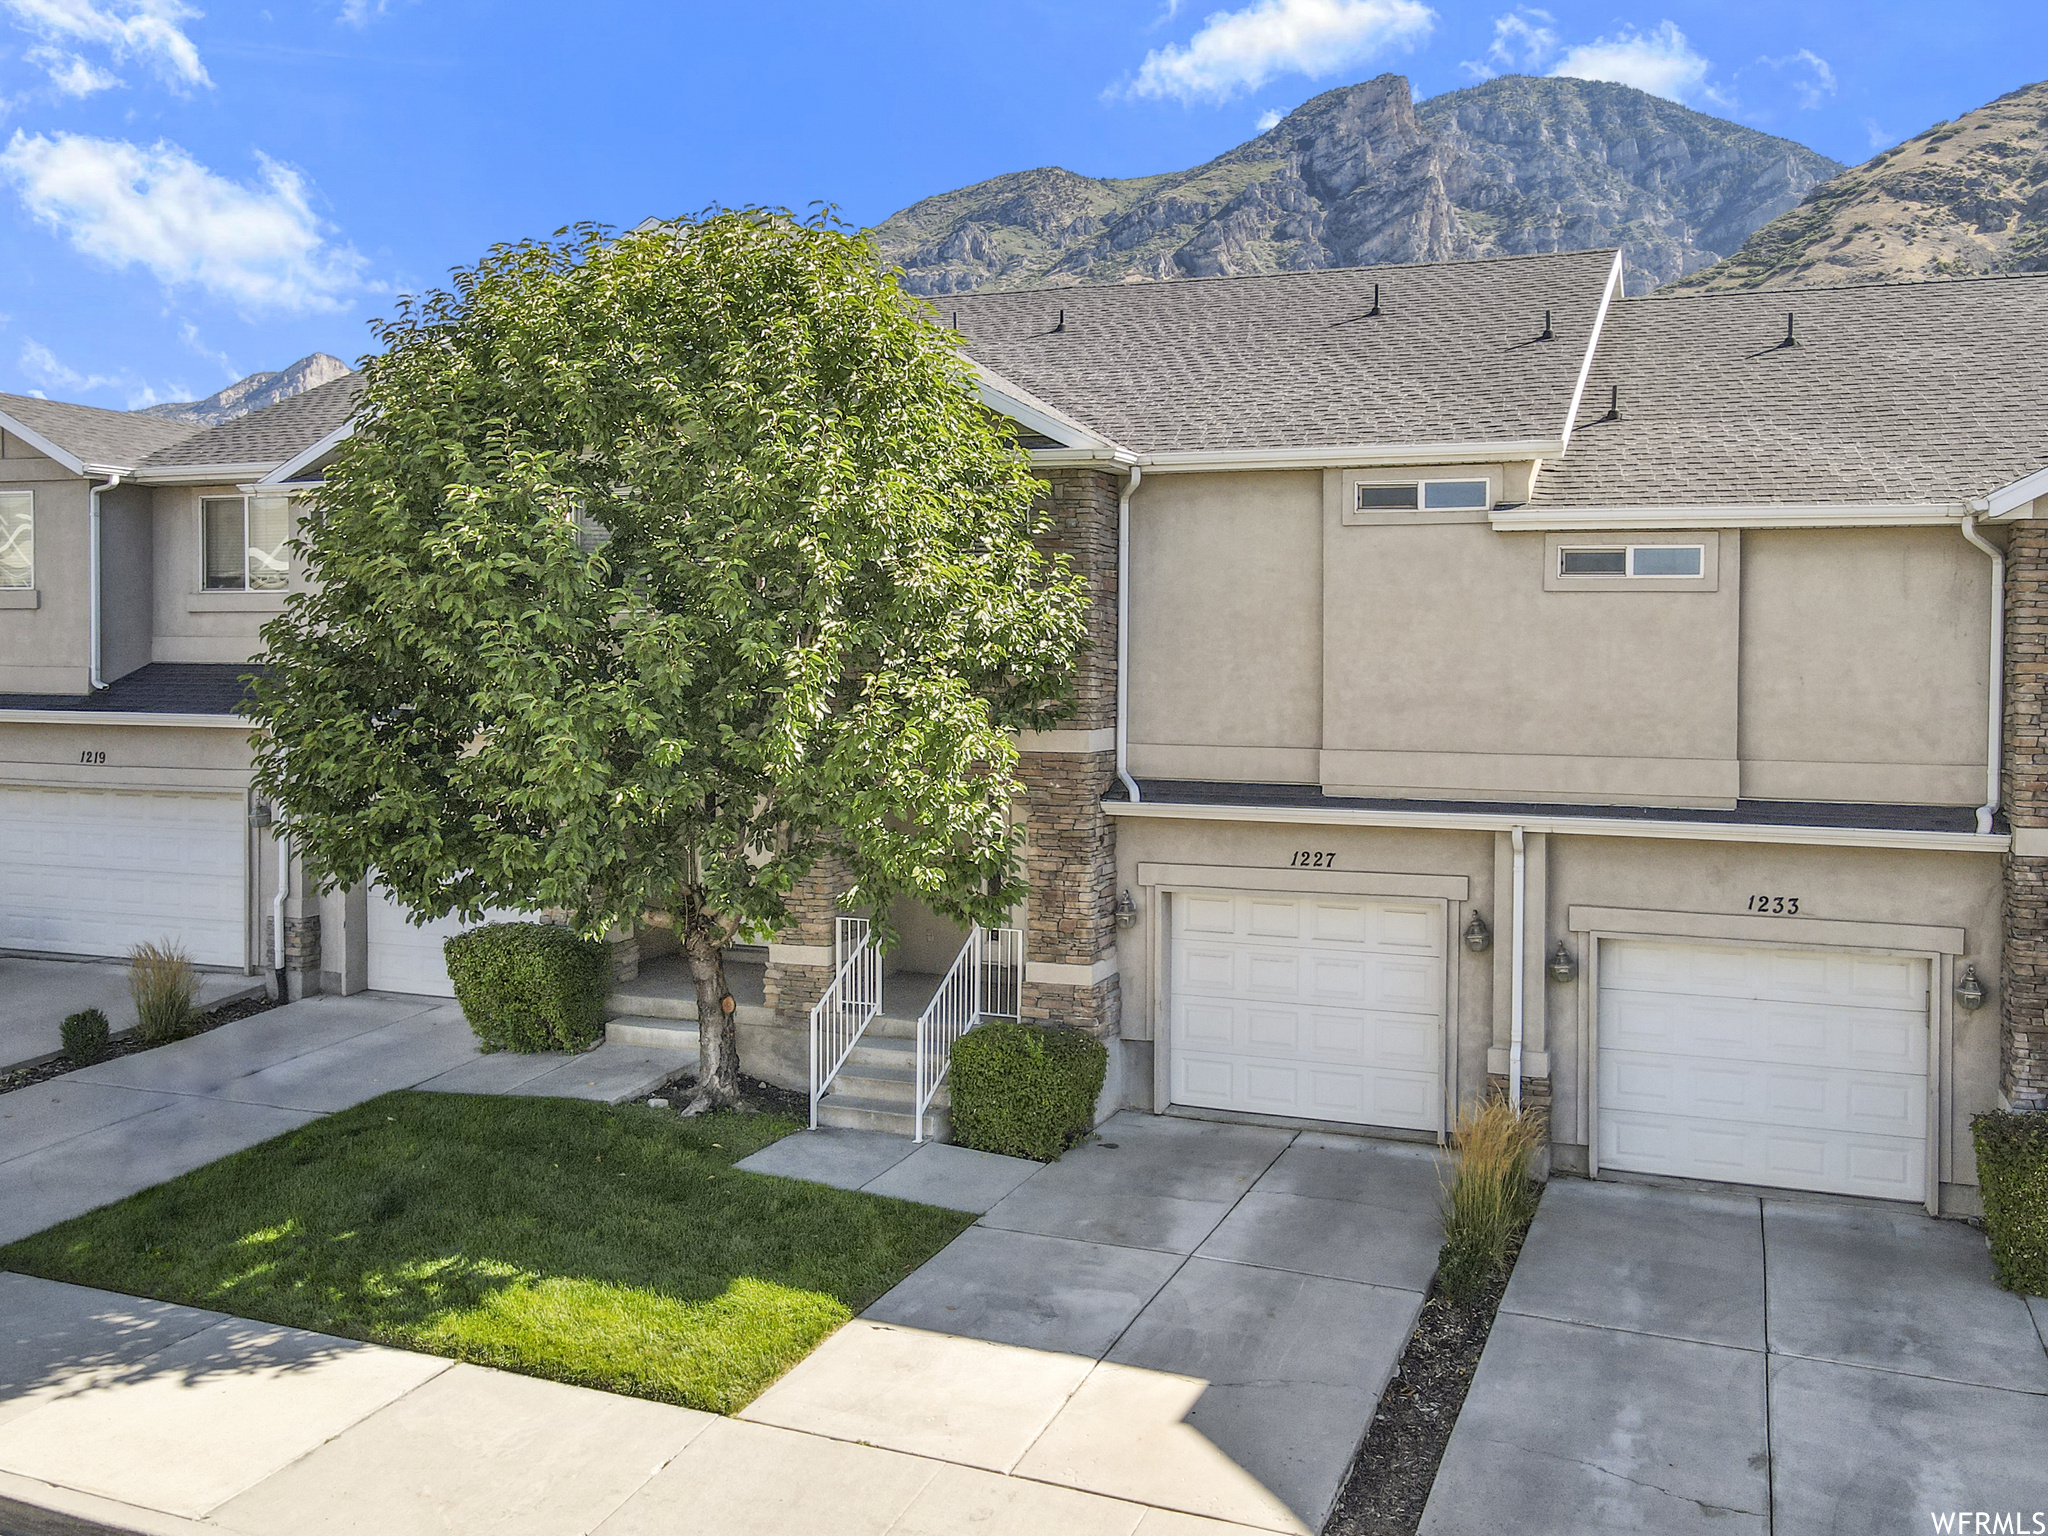 Townhome / multi-family property featuring a mountain view and a garage